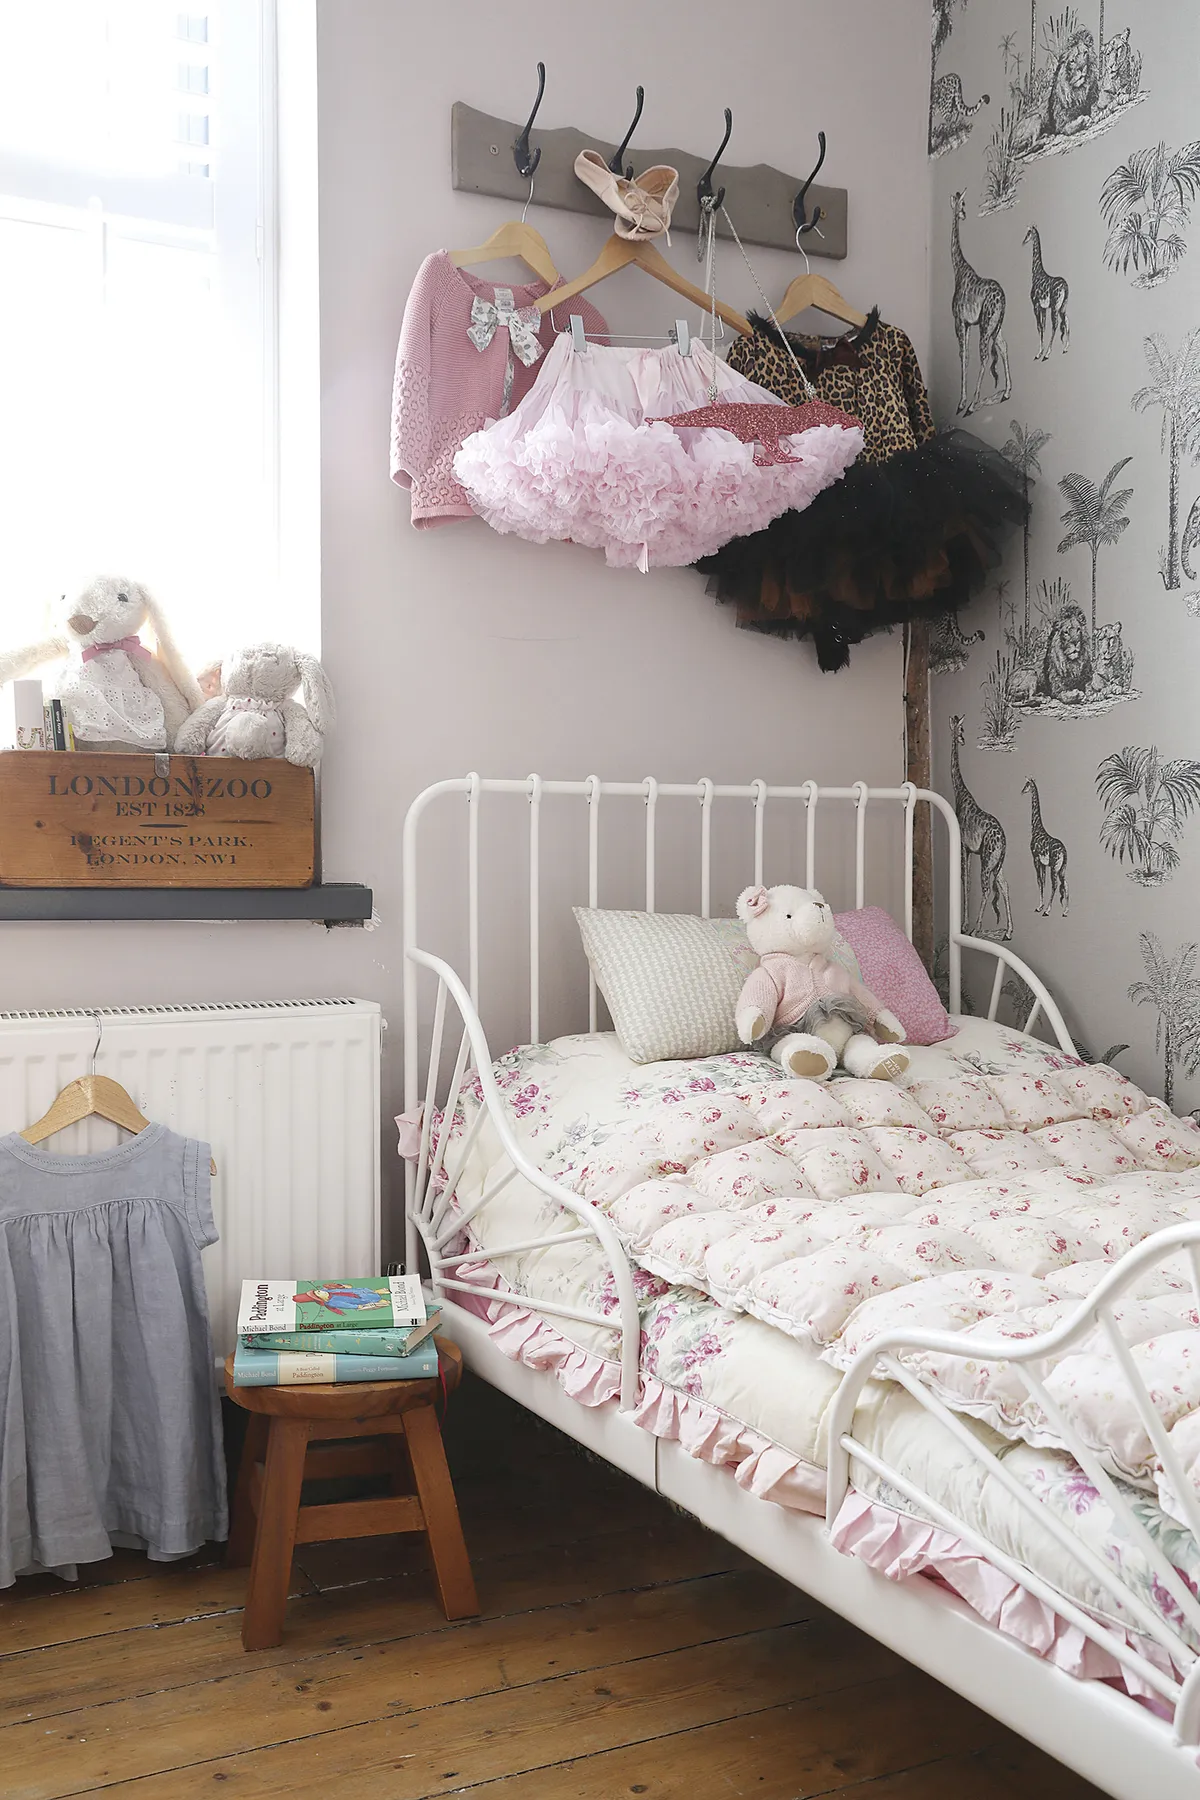 ‘The Cole & Son wallpaper was one of my biggest indulgences. It wasn’t cheap but I fell in love with it. Annie adores ballet so we’ve hung her tutus above the bed’